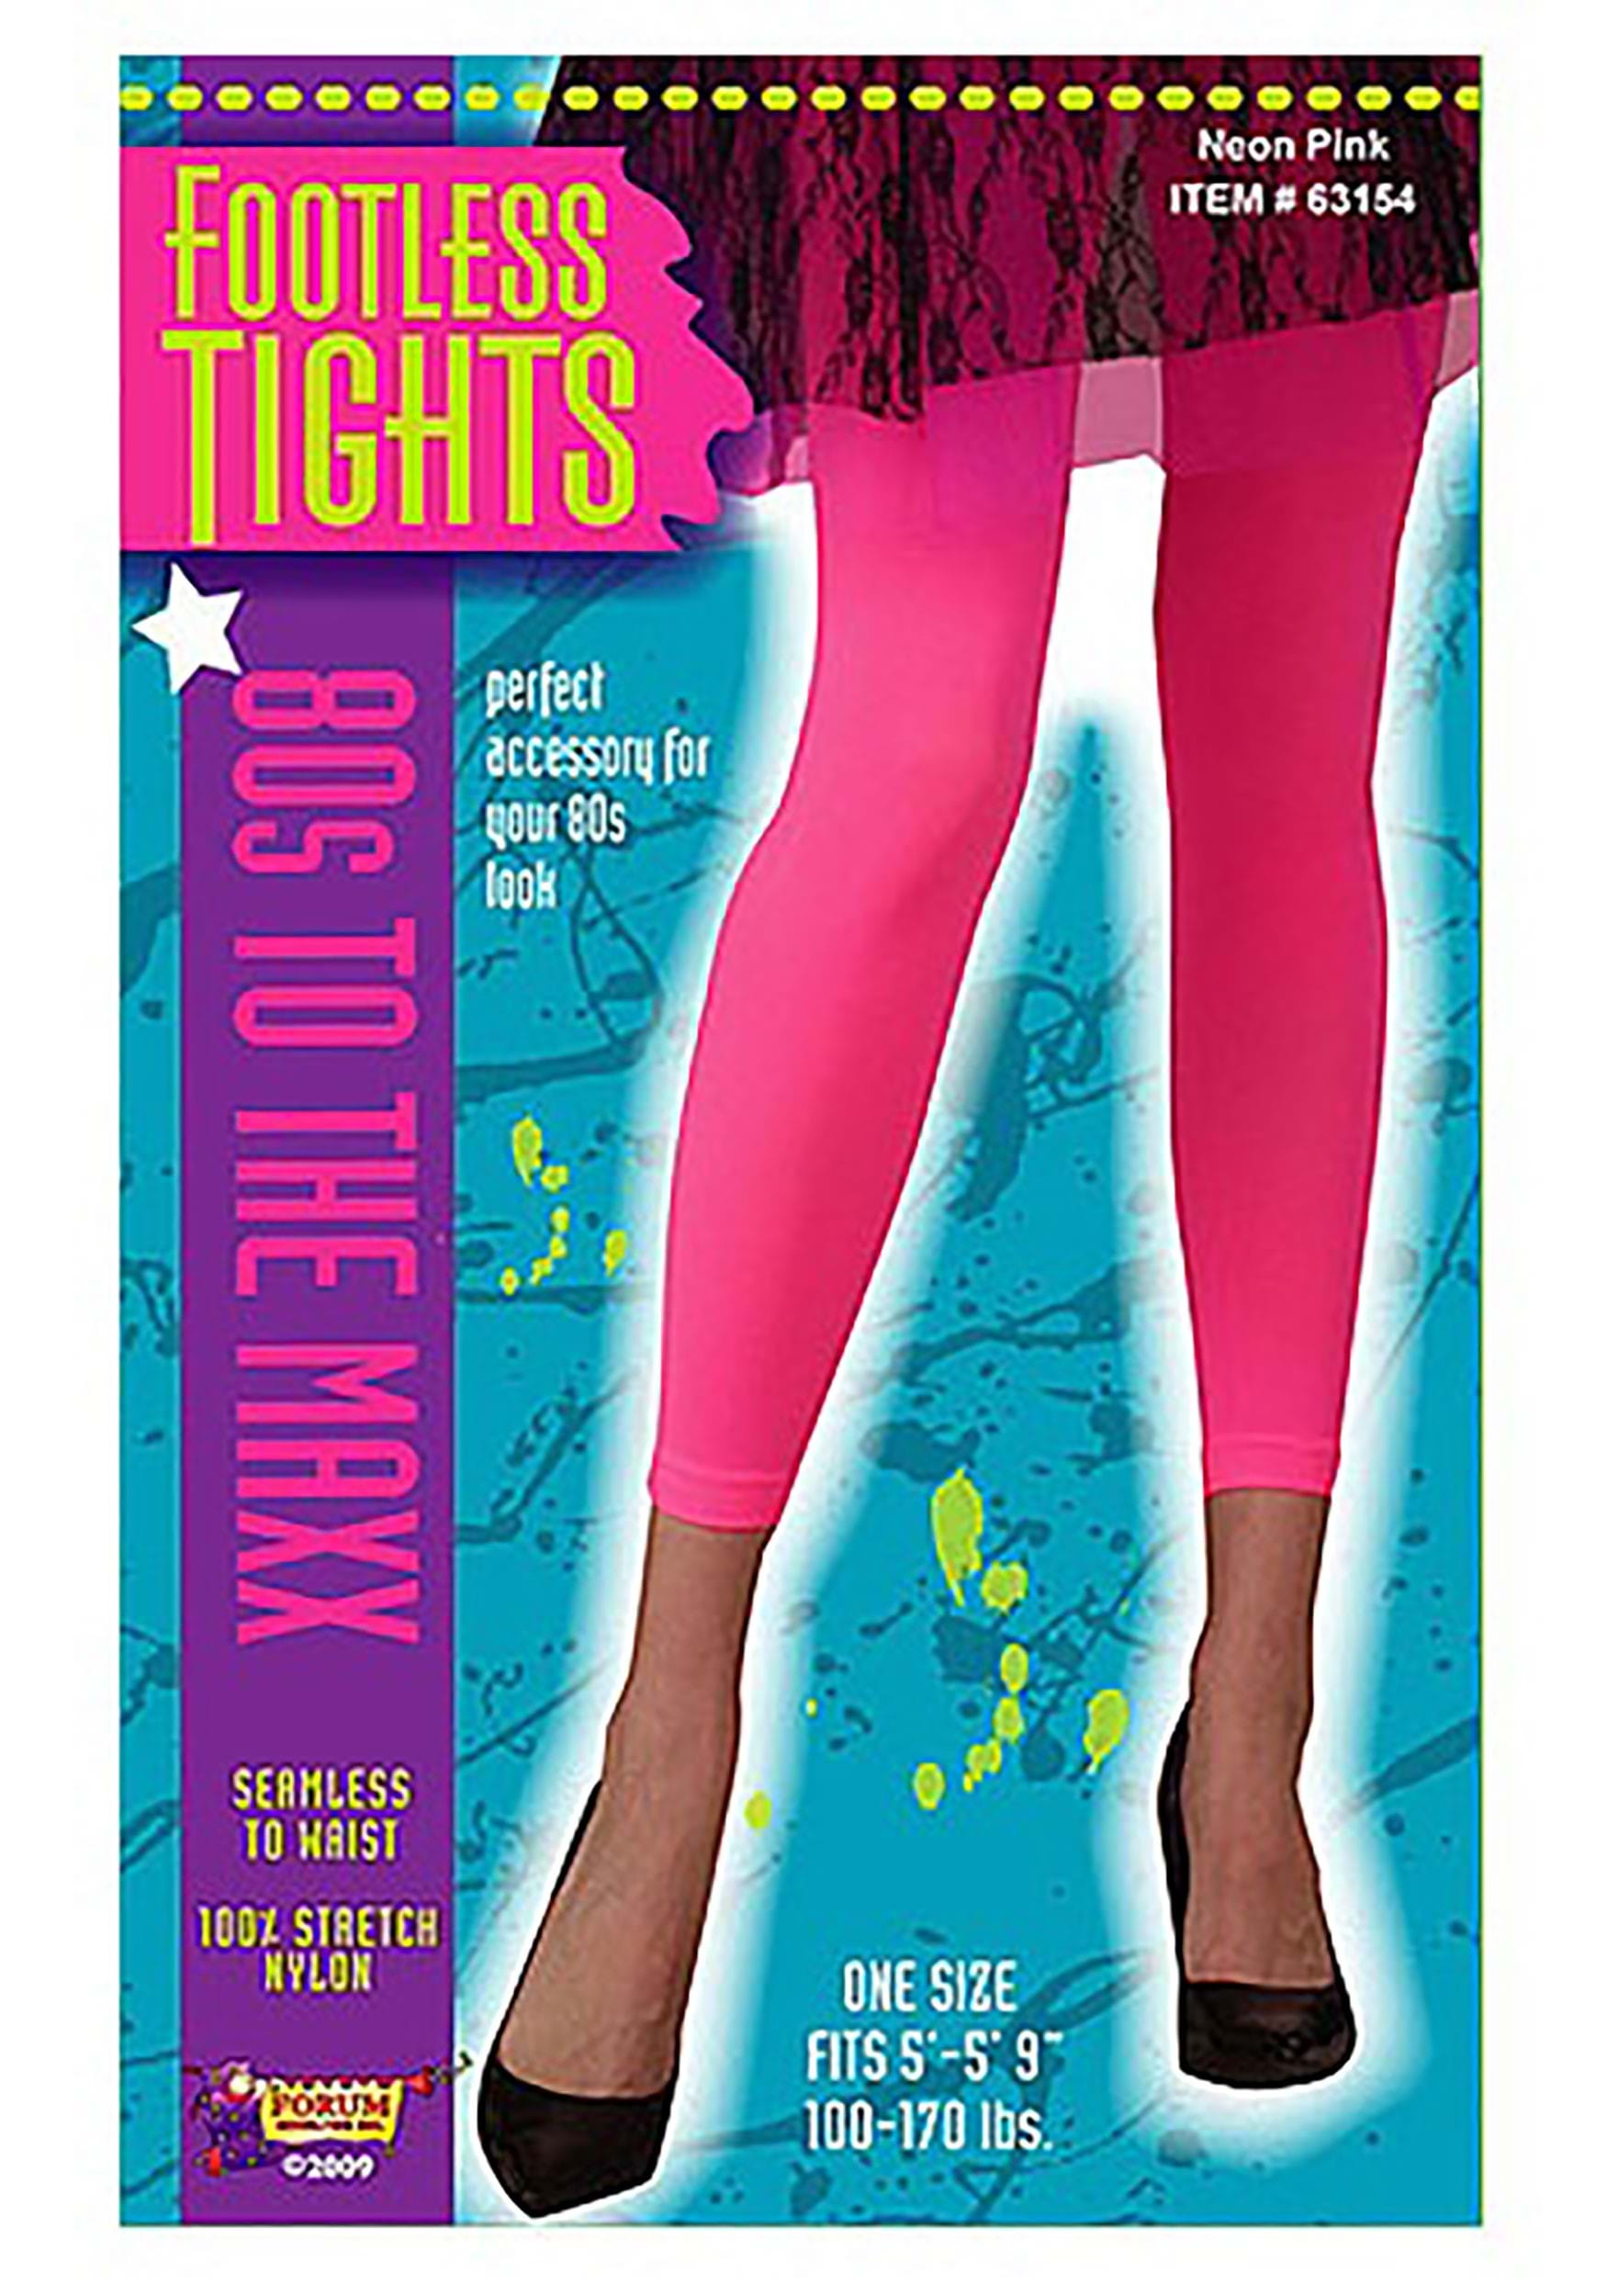 https://images.halloweencostumes.com/products/3967/1-1/neon-pink-footless-tights-update.jpg